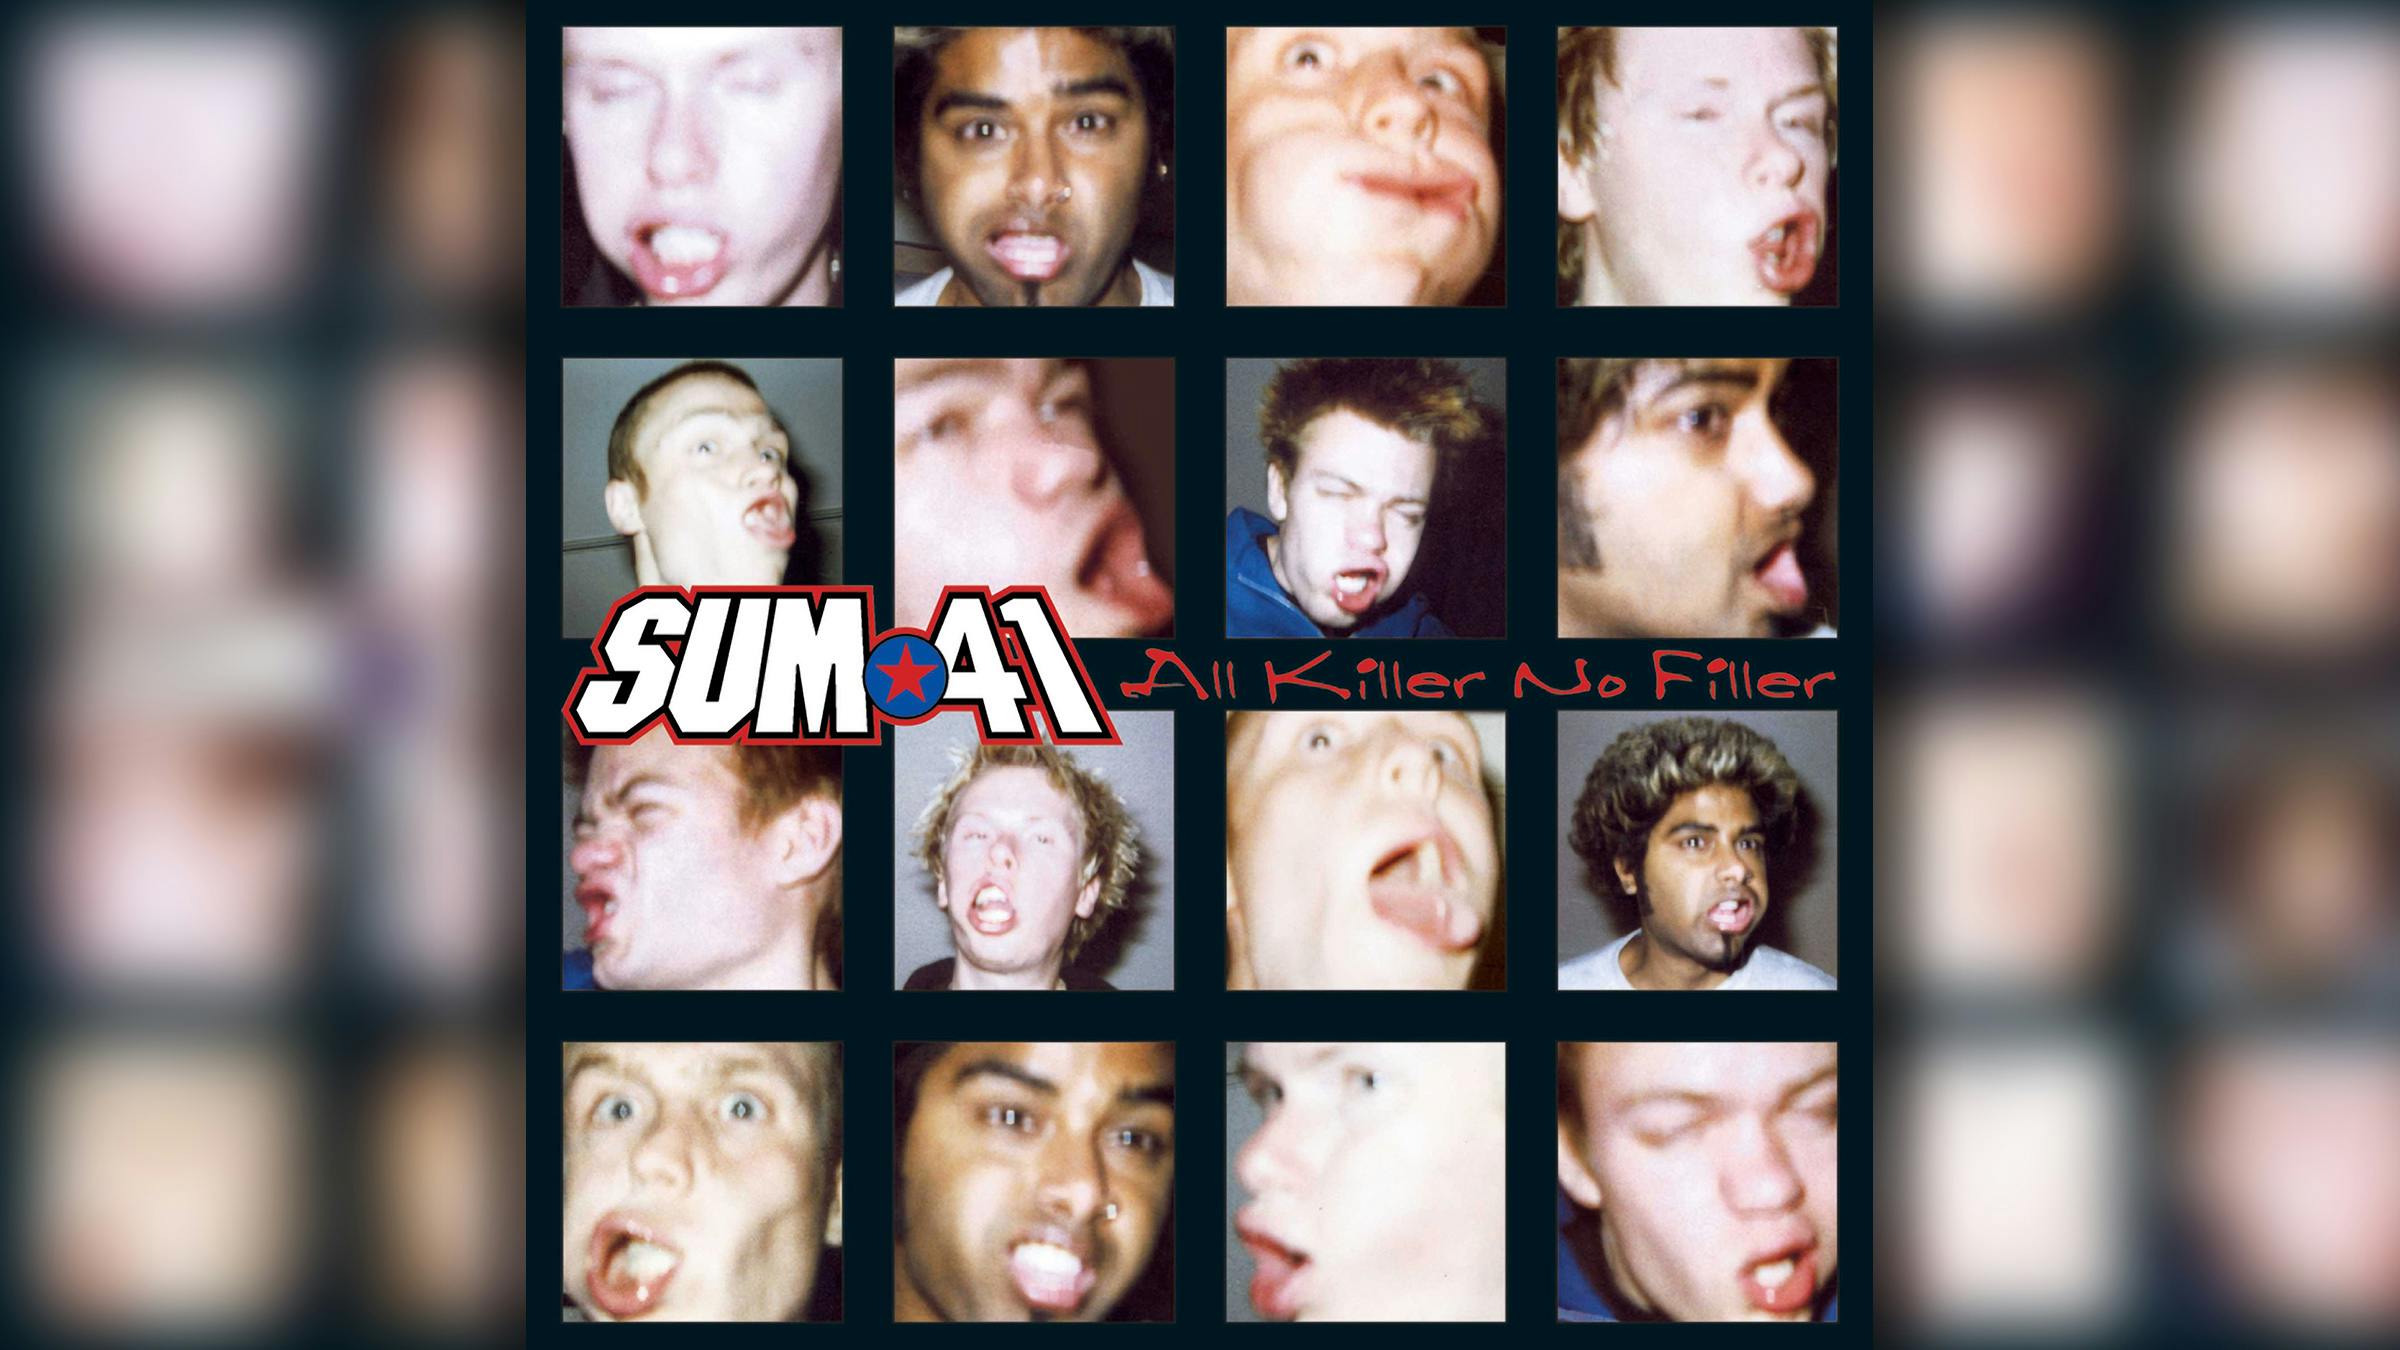 Sum 41 open up about the making of All Killer No Filler, an album that helped define a generation